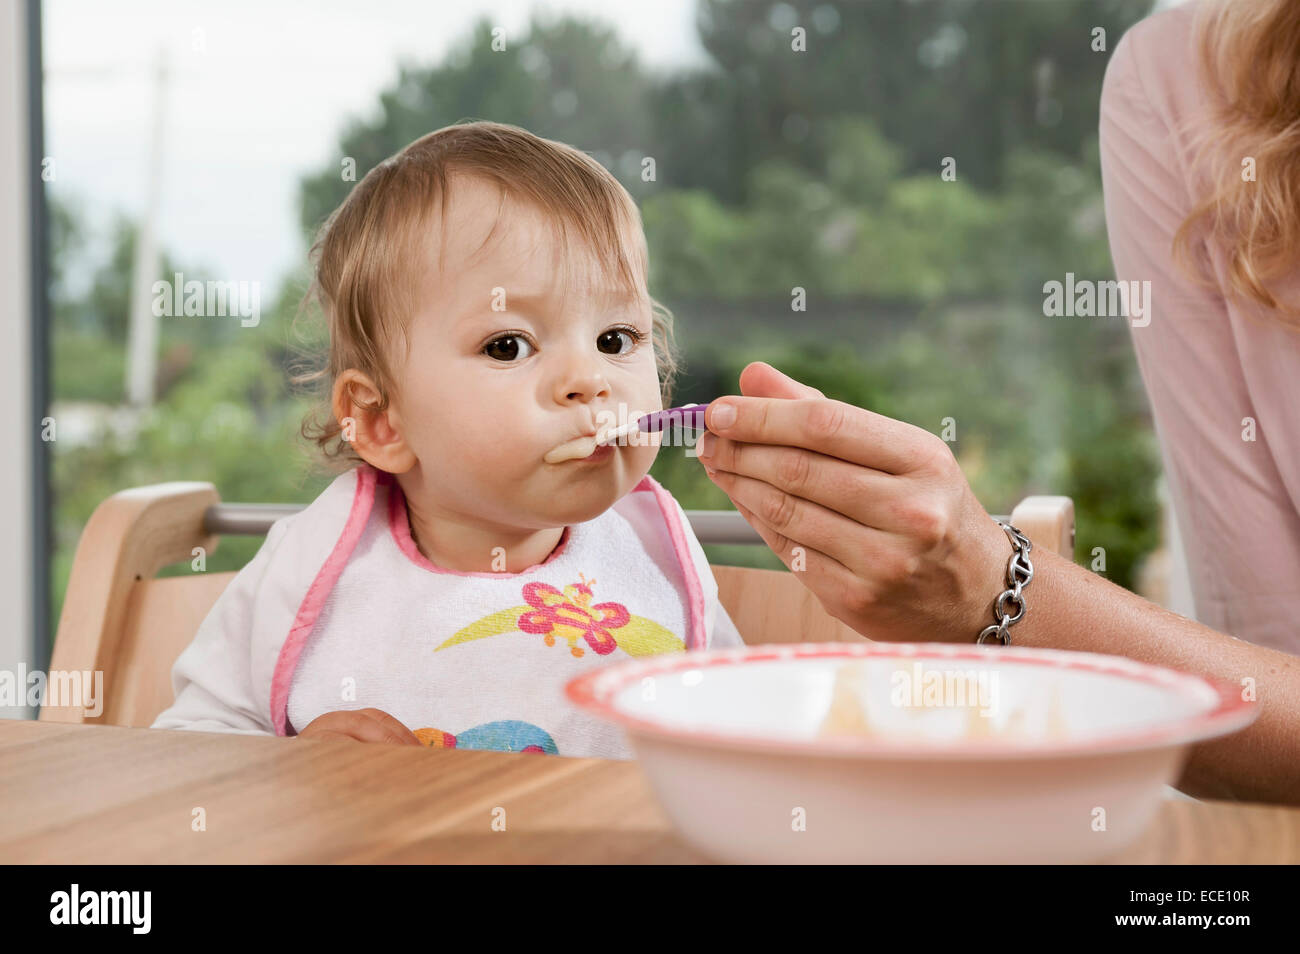 Mother feeding 1 year old baby girl eating Stock Photo